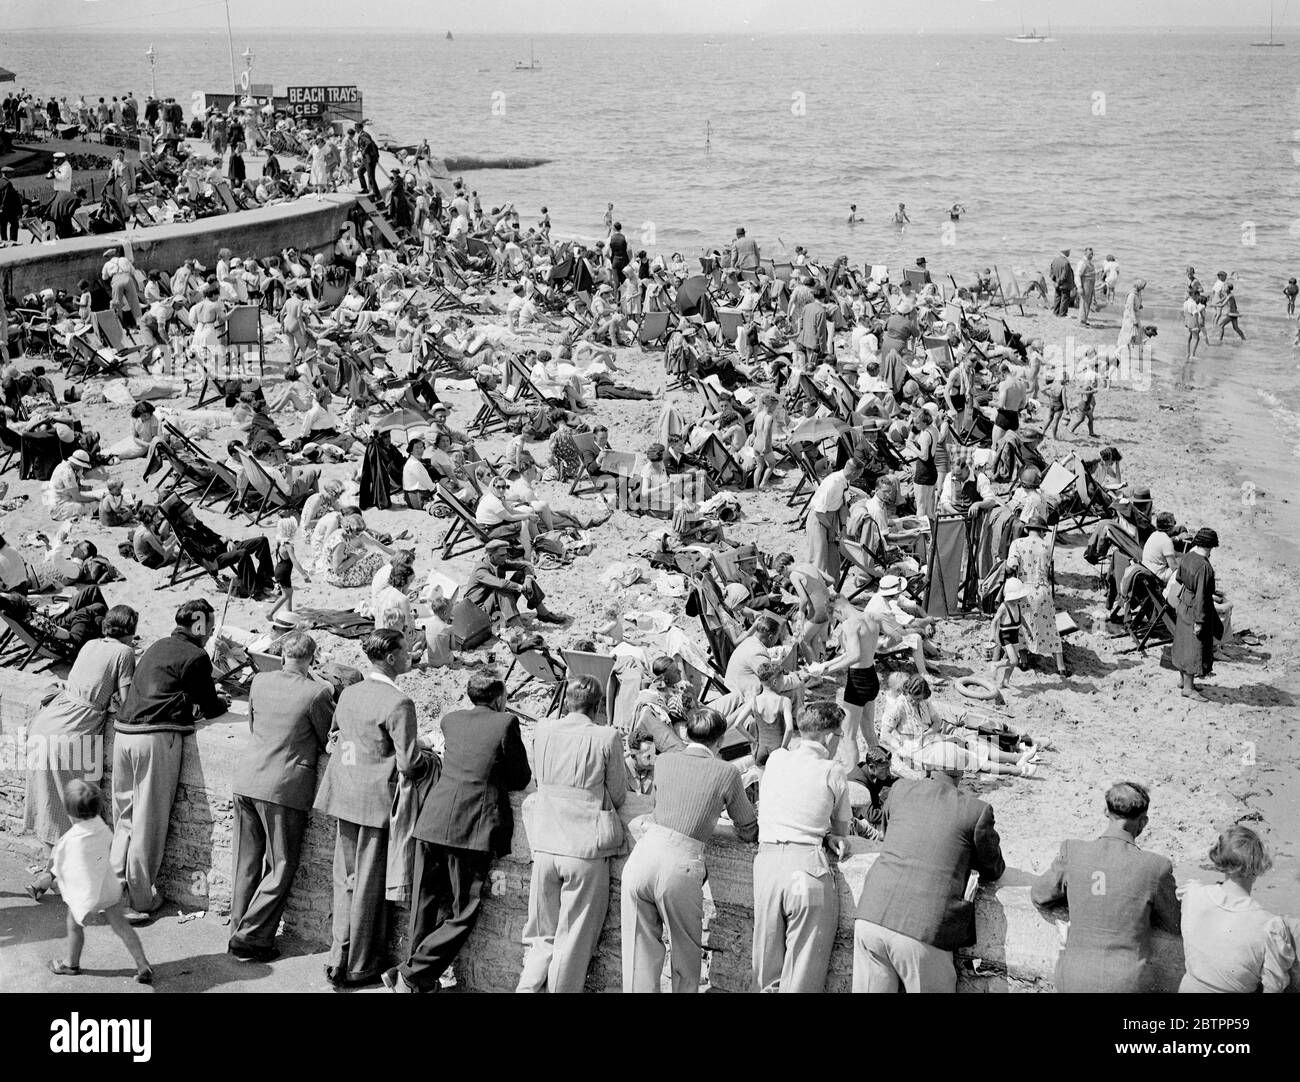 Crowds Pack Ryde, Sunny holiday. Favoured by the sun, large crowds thronged Ryde, Isle of Wight, today (Bank Holiday Sunday). Photo shows, the crowd on the sunny beach at Ryde. 31 July 1938 Stock Photo